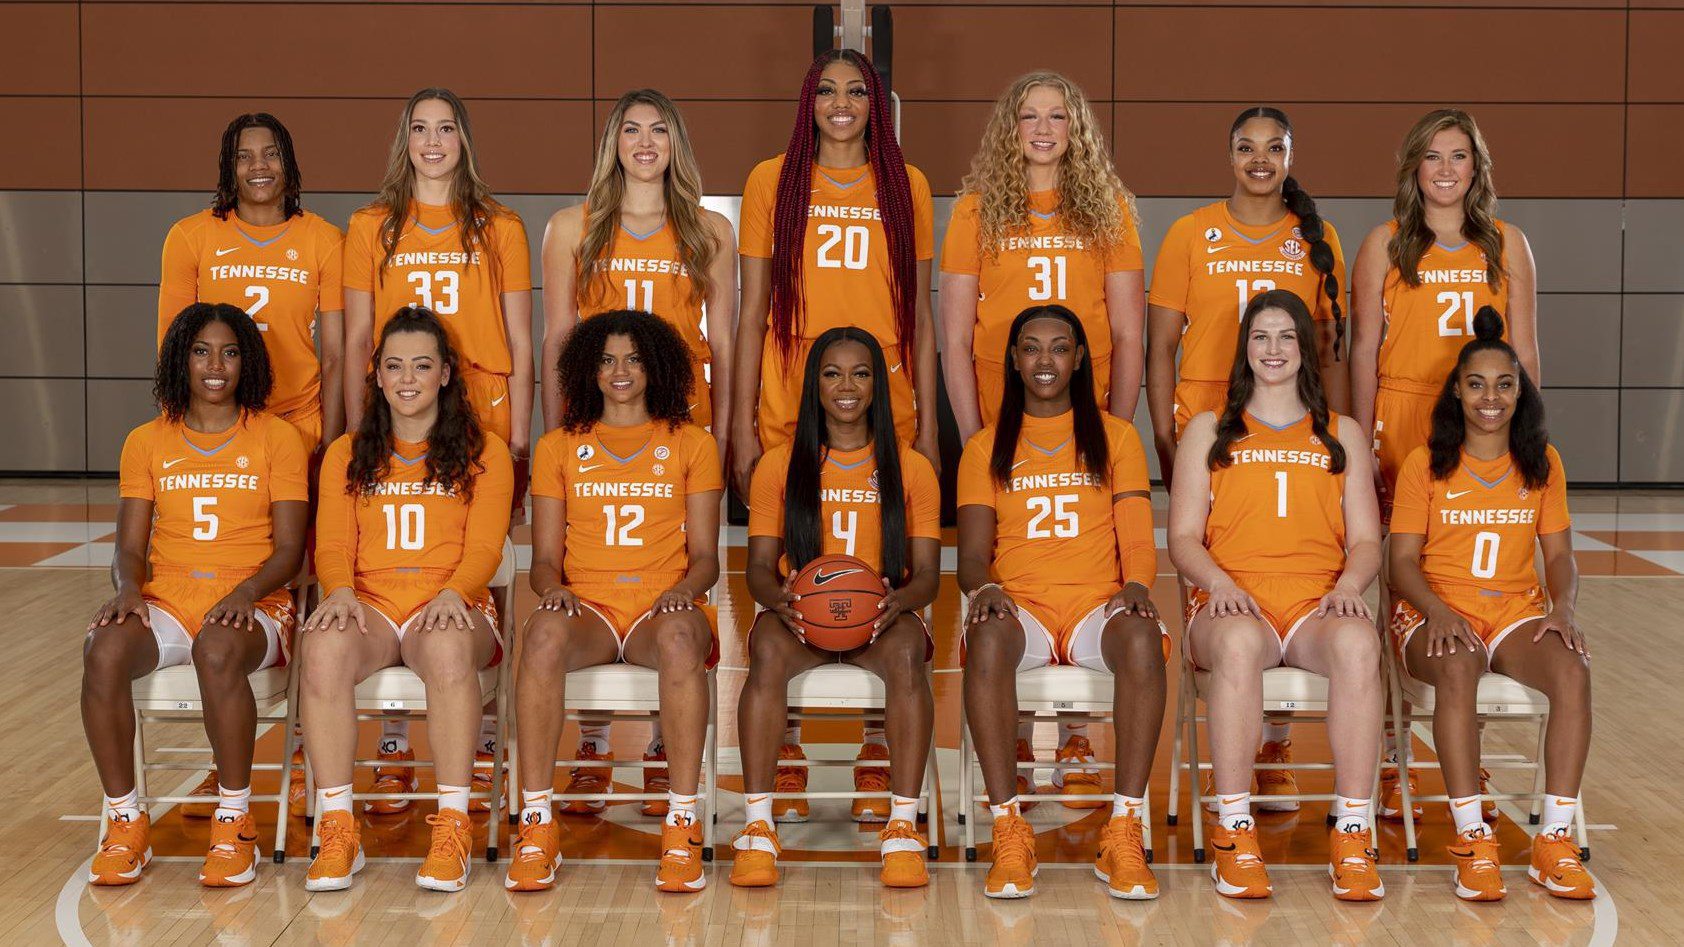 Lady Vols in the WNBA - University of Tennessee Athletics